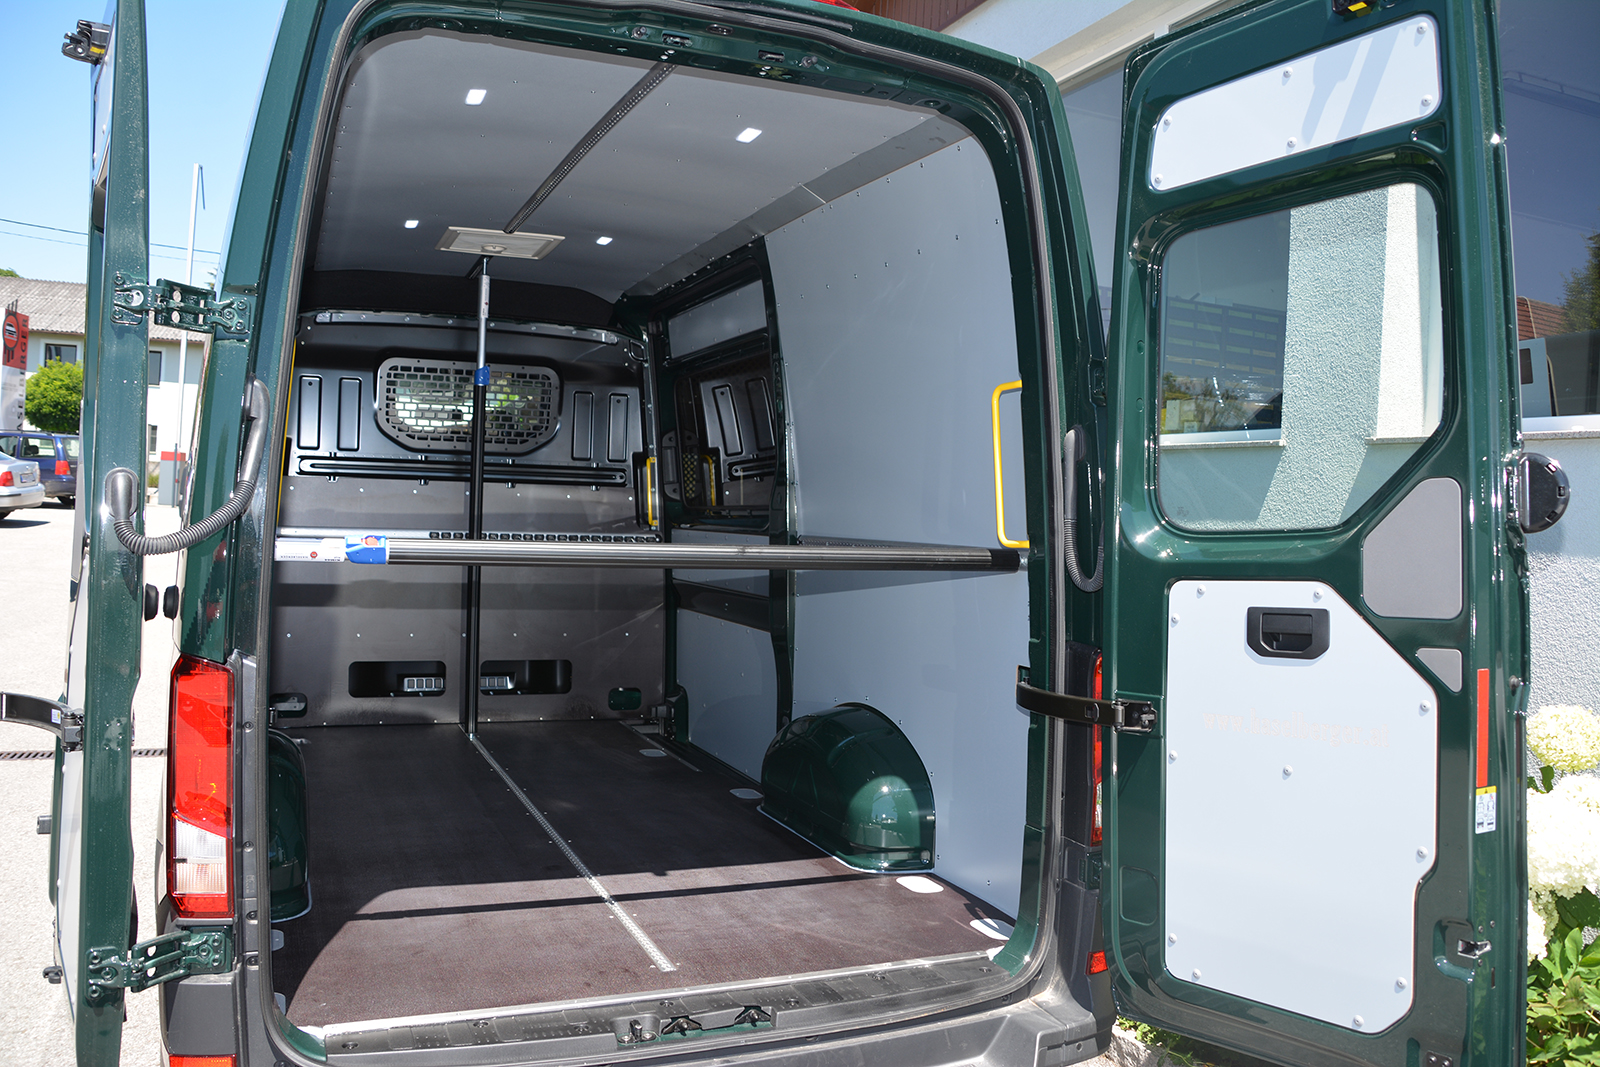 haselberger_vw_crafter_19